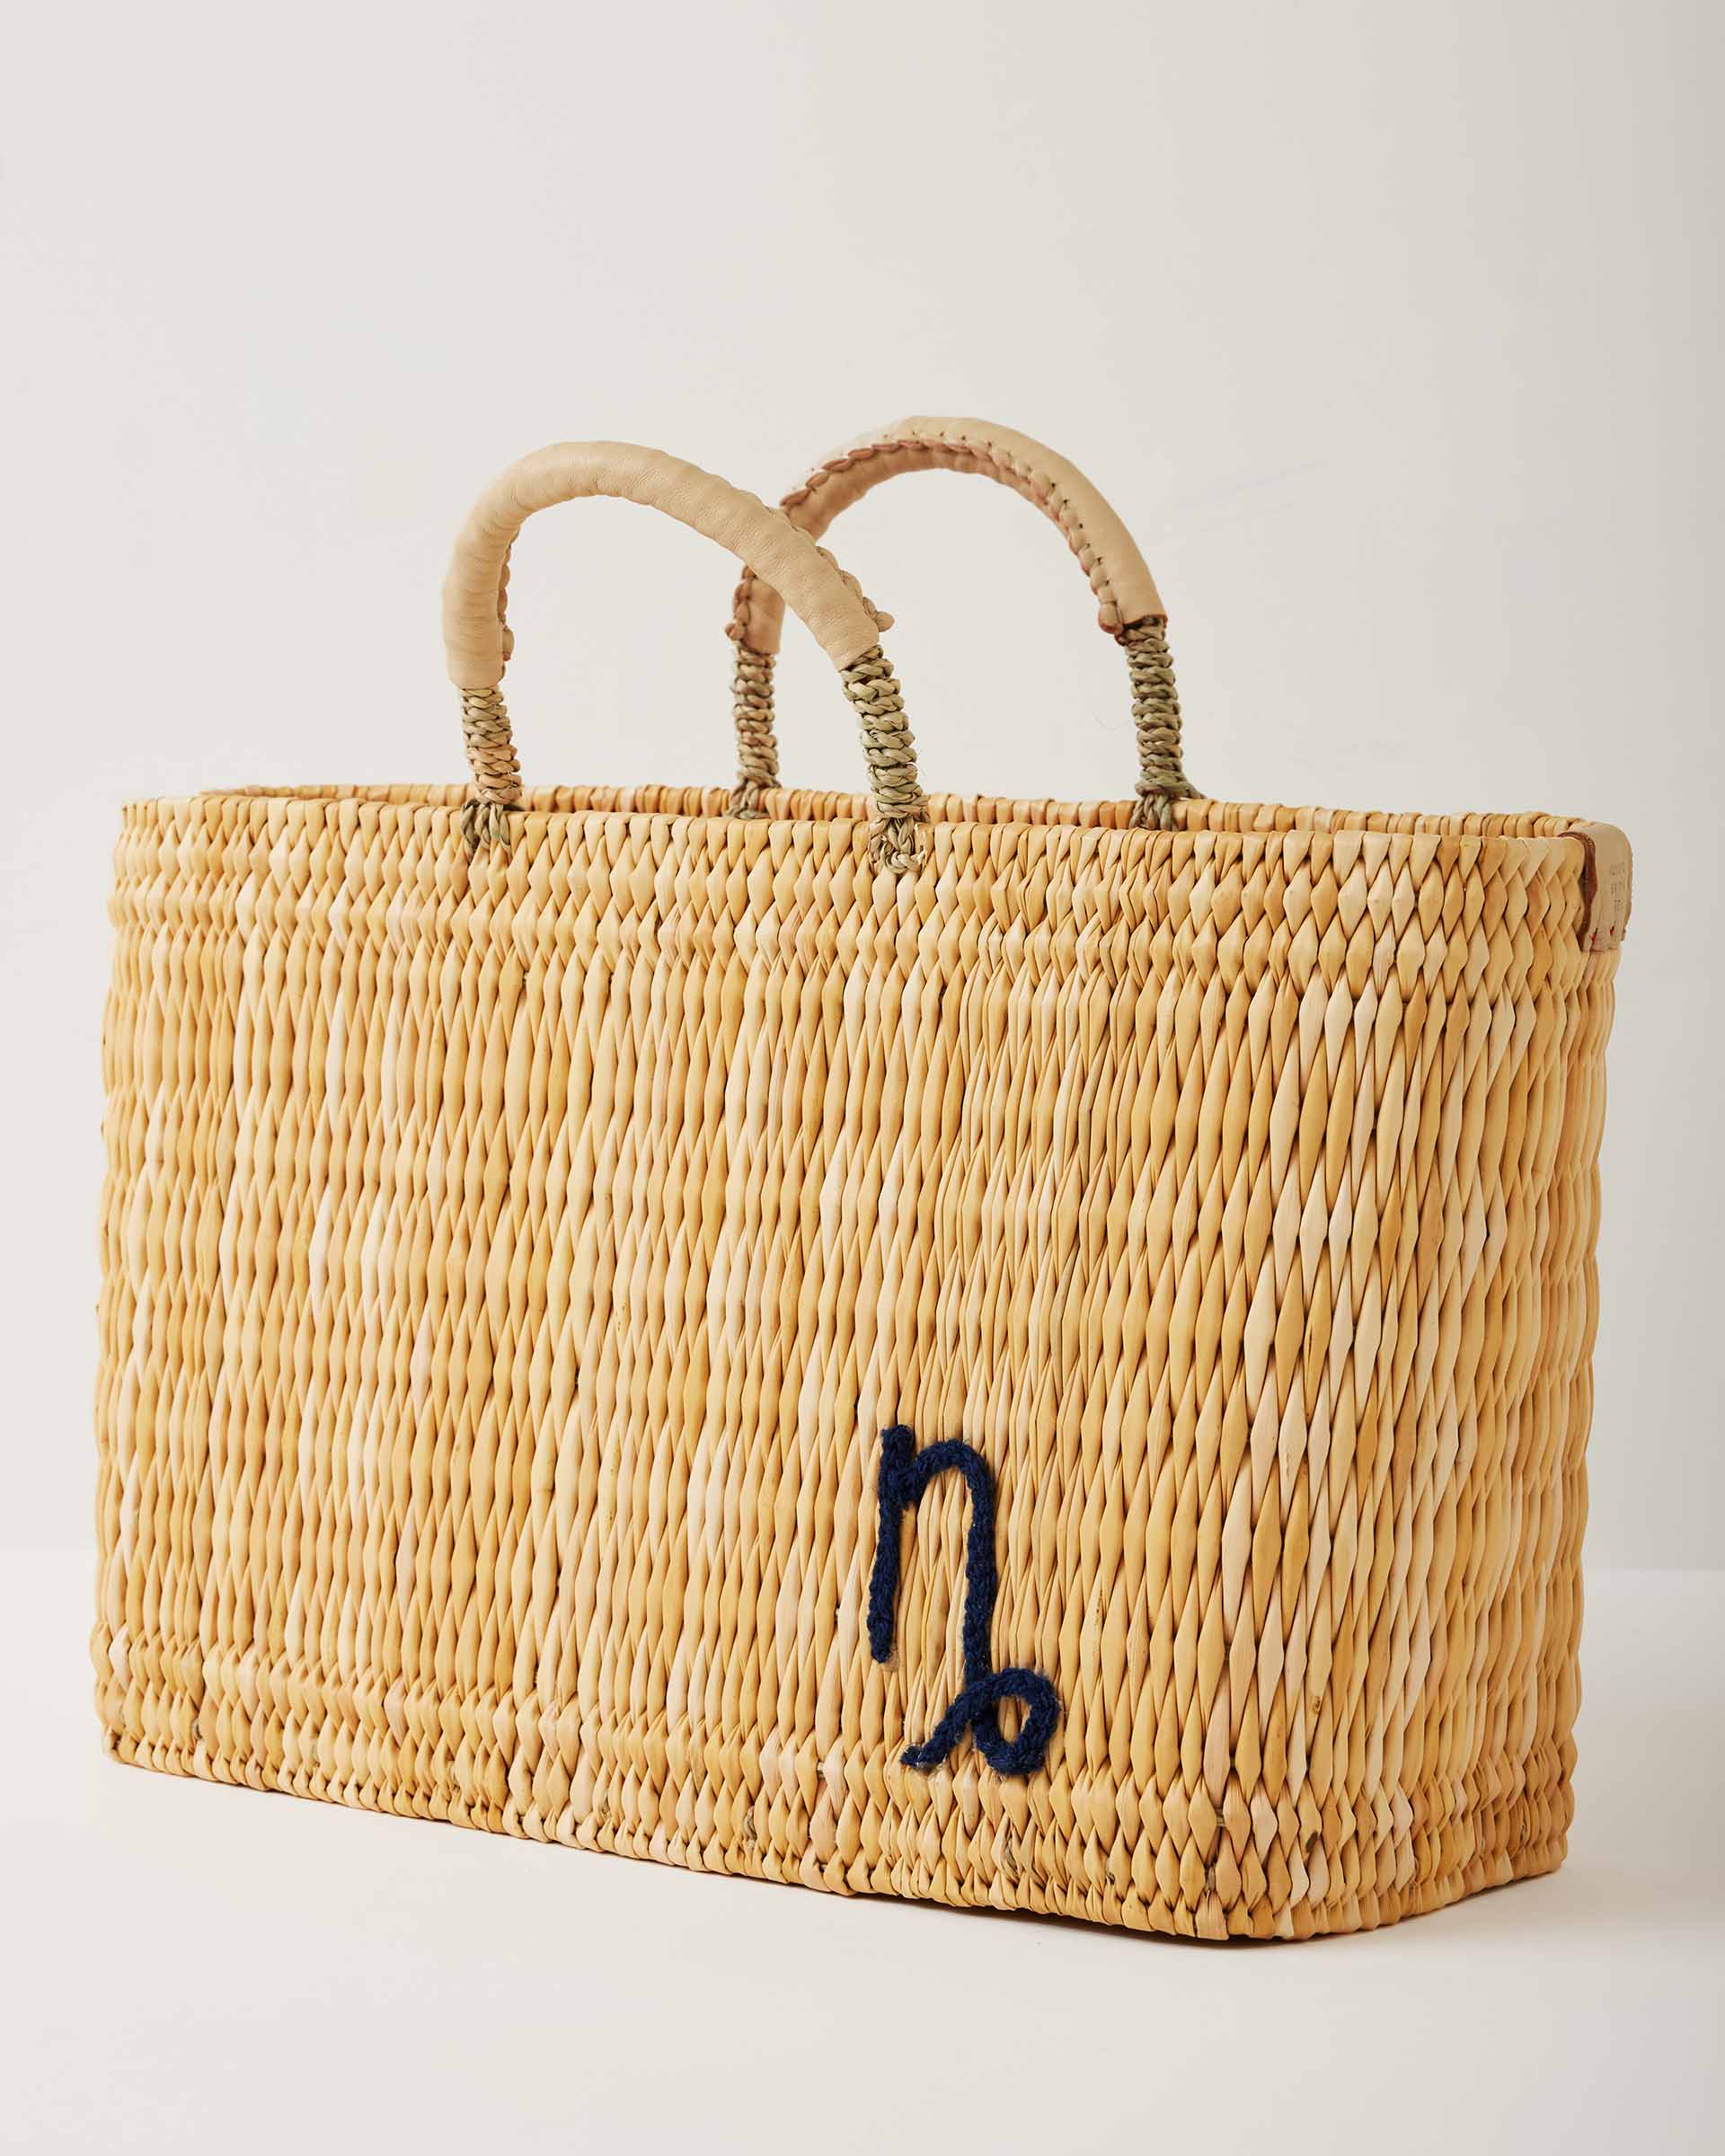 Market straw basket with tan leather handles and Capricorn symbol embroidered in black